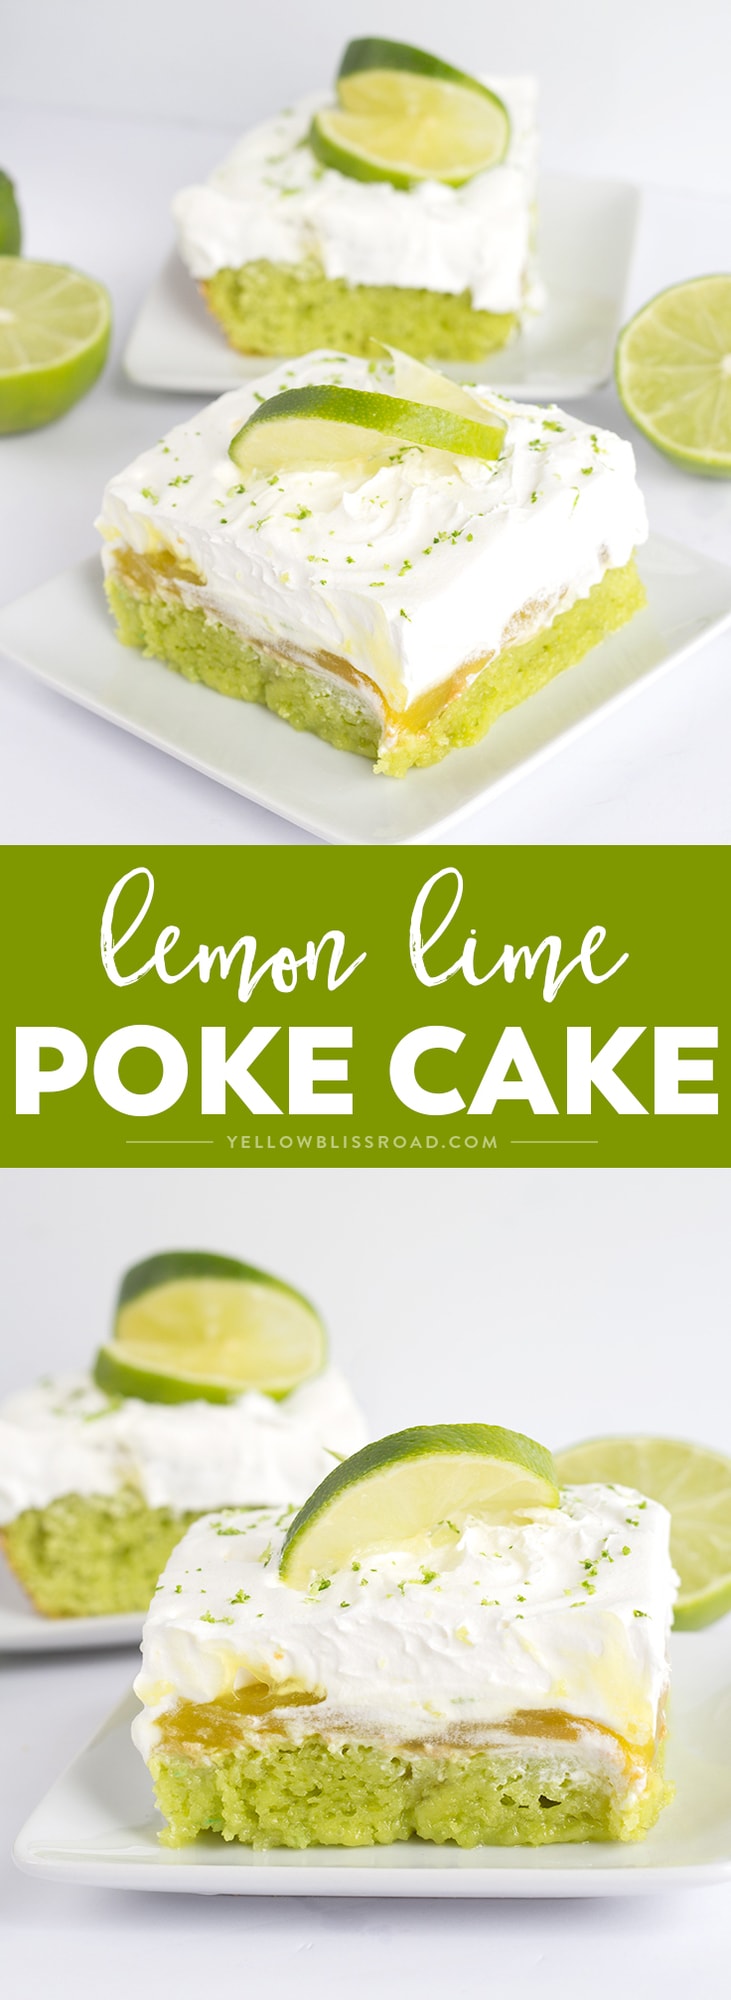 This lemon lime poke cake is packed full of flavor and a super simple dessert to make.